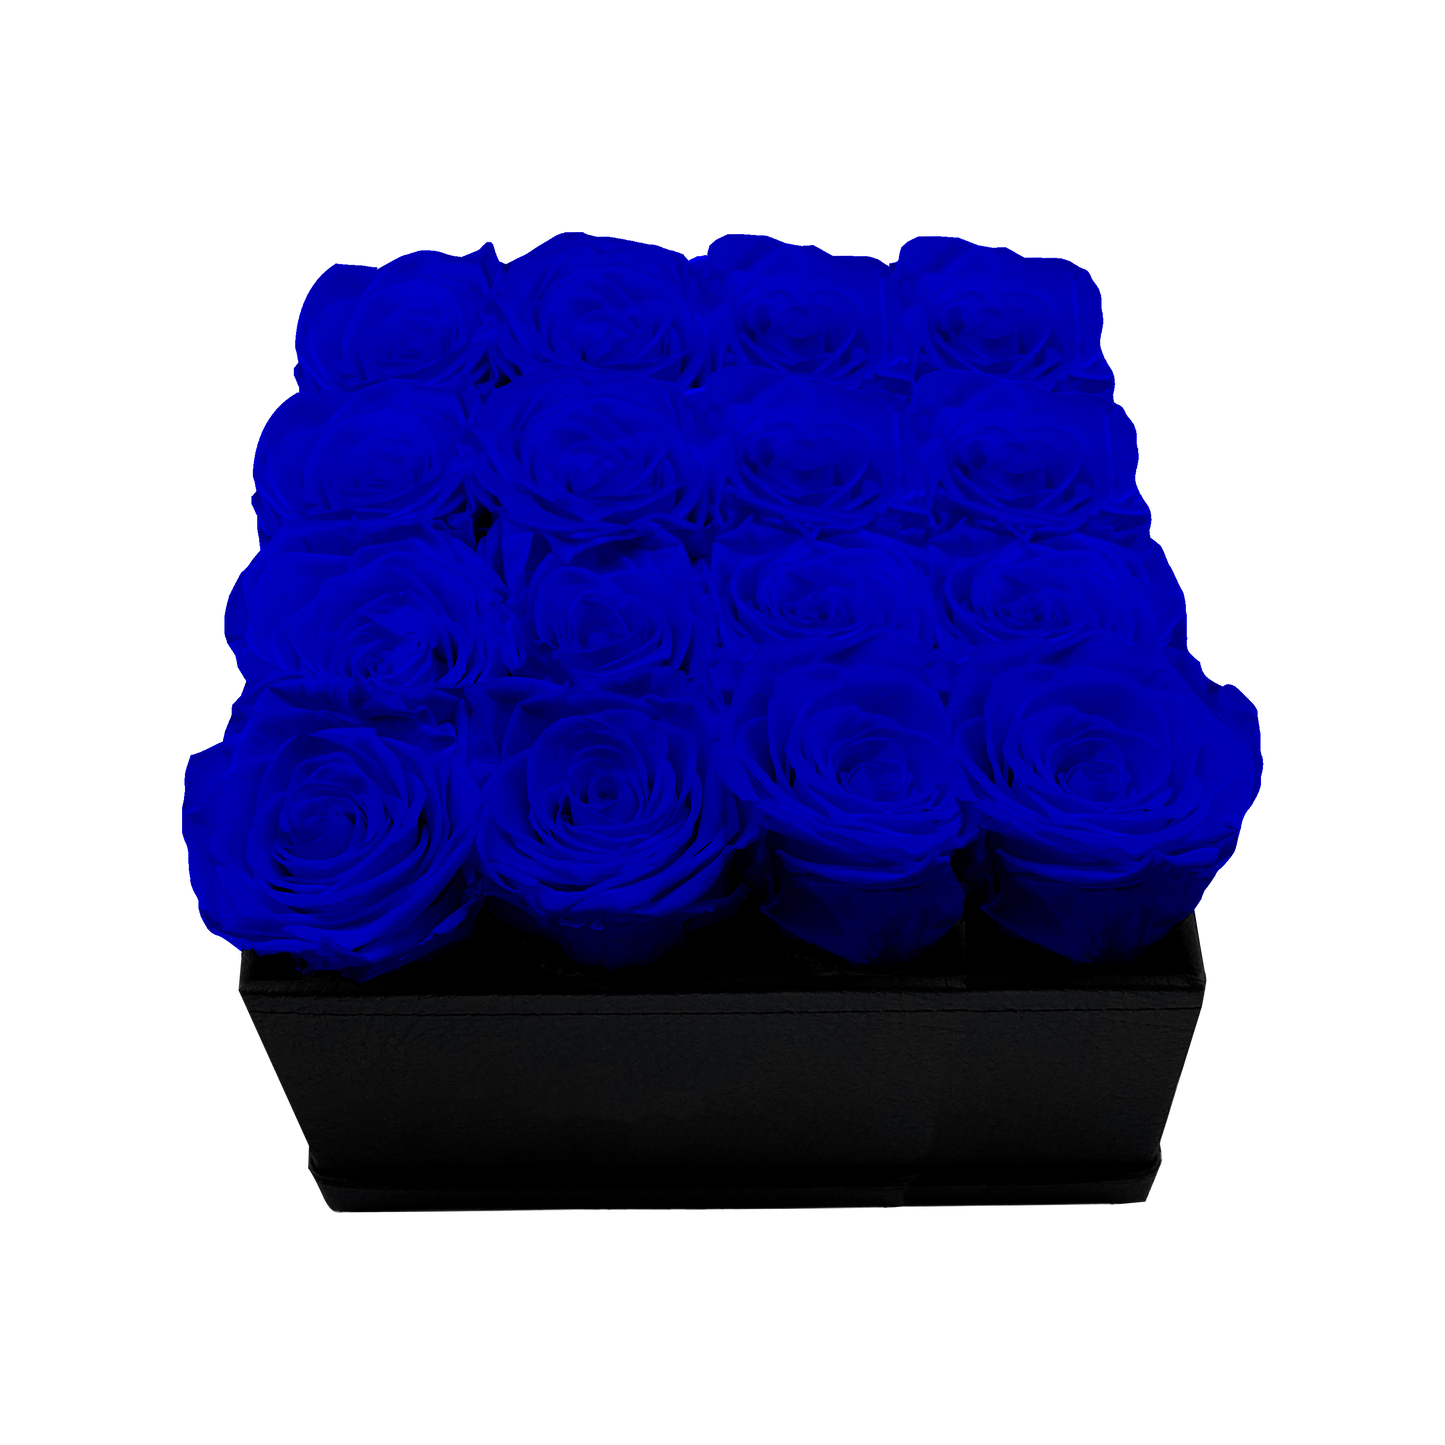 LUXURY 16 PRESERVED ROSES ARRANGEMENT - SQUARE PU LEATHER BOX